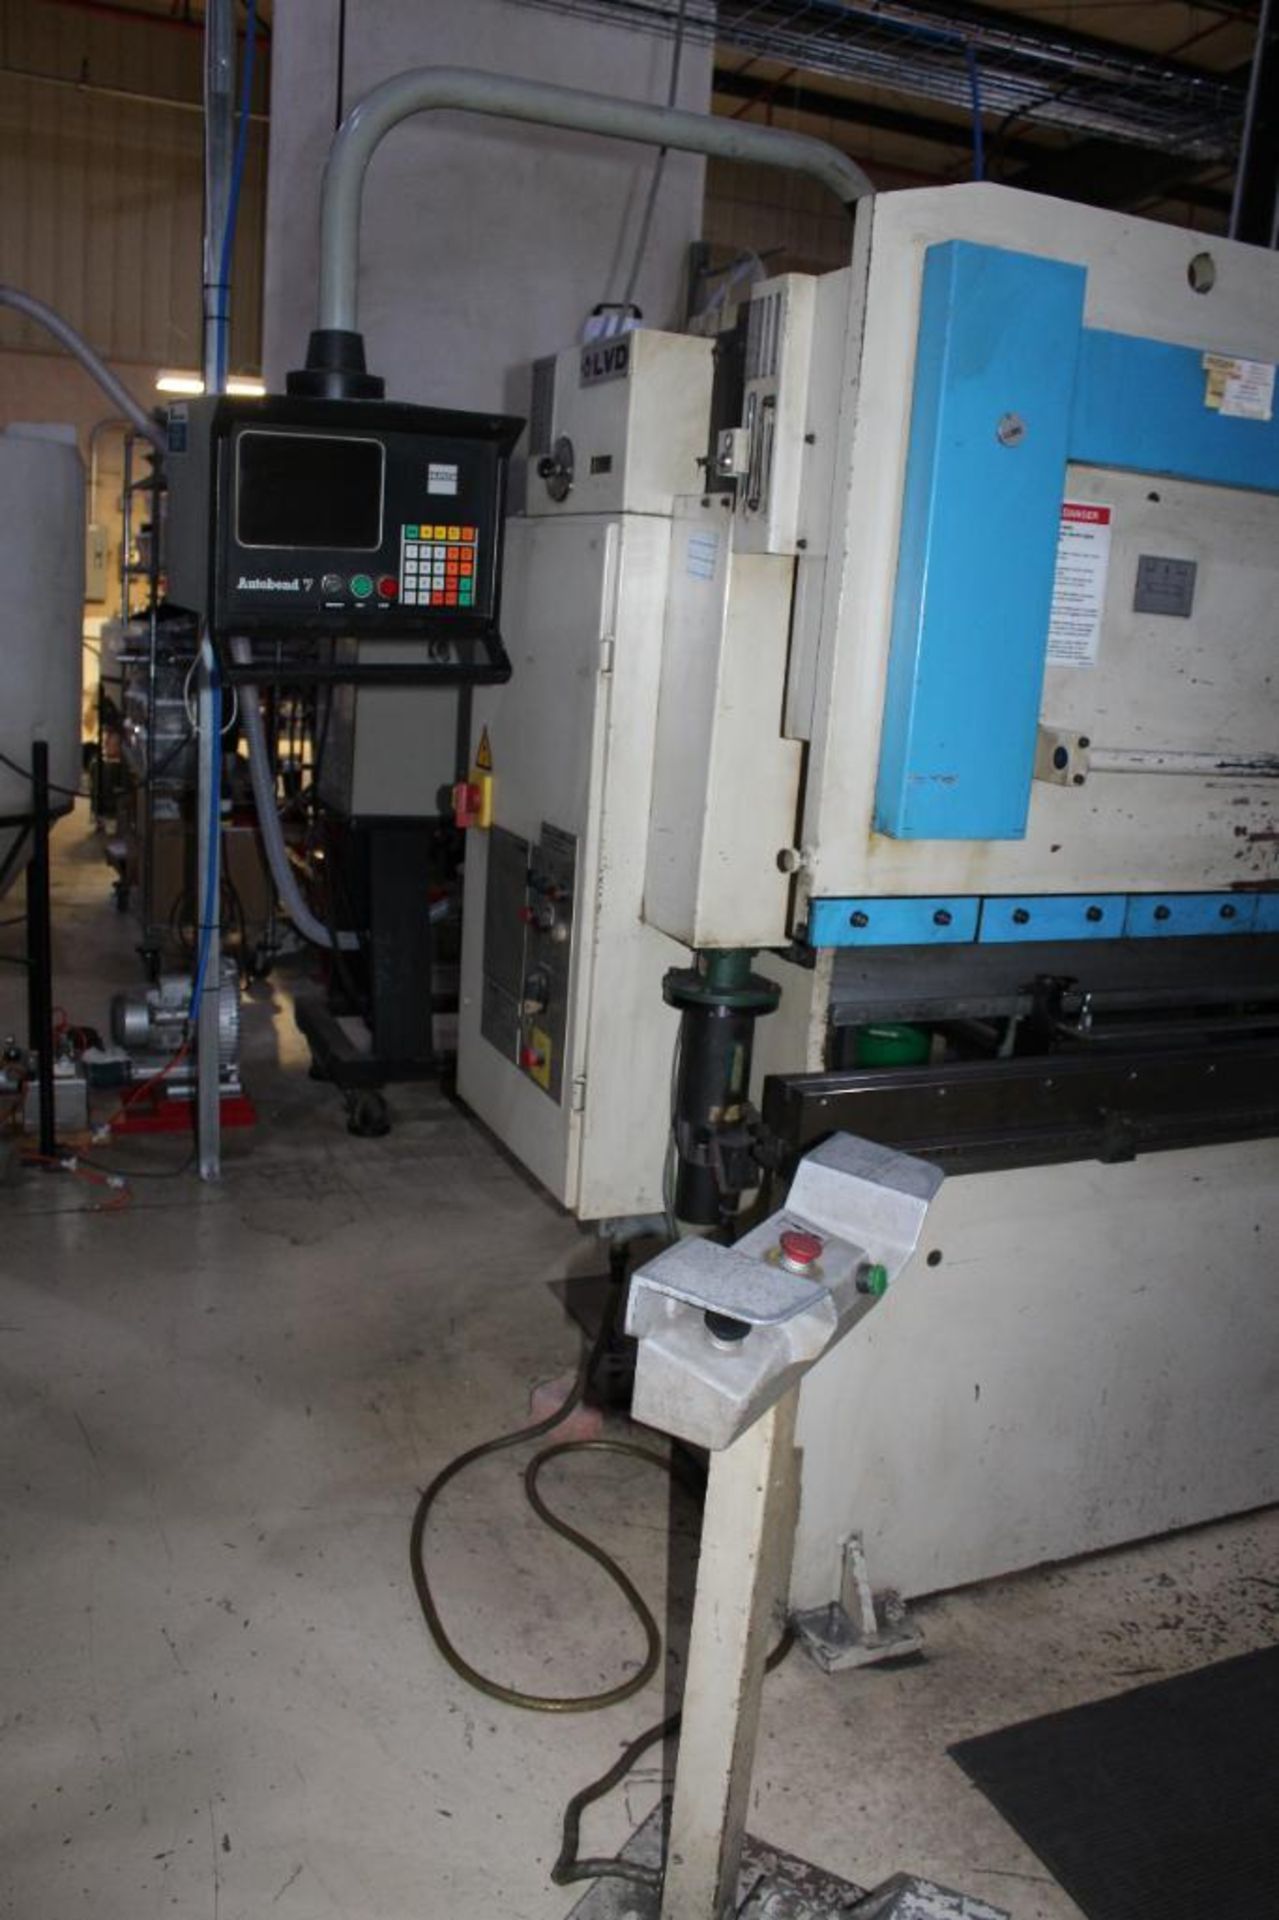 1993 LVD Hydraulic Press Brake Model 45JS06 With Hurco AutoBend 7 CNC Back Gage - Image 5 of 16